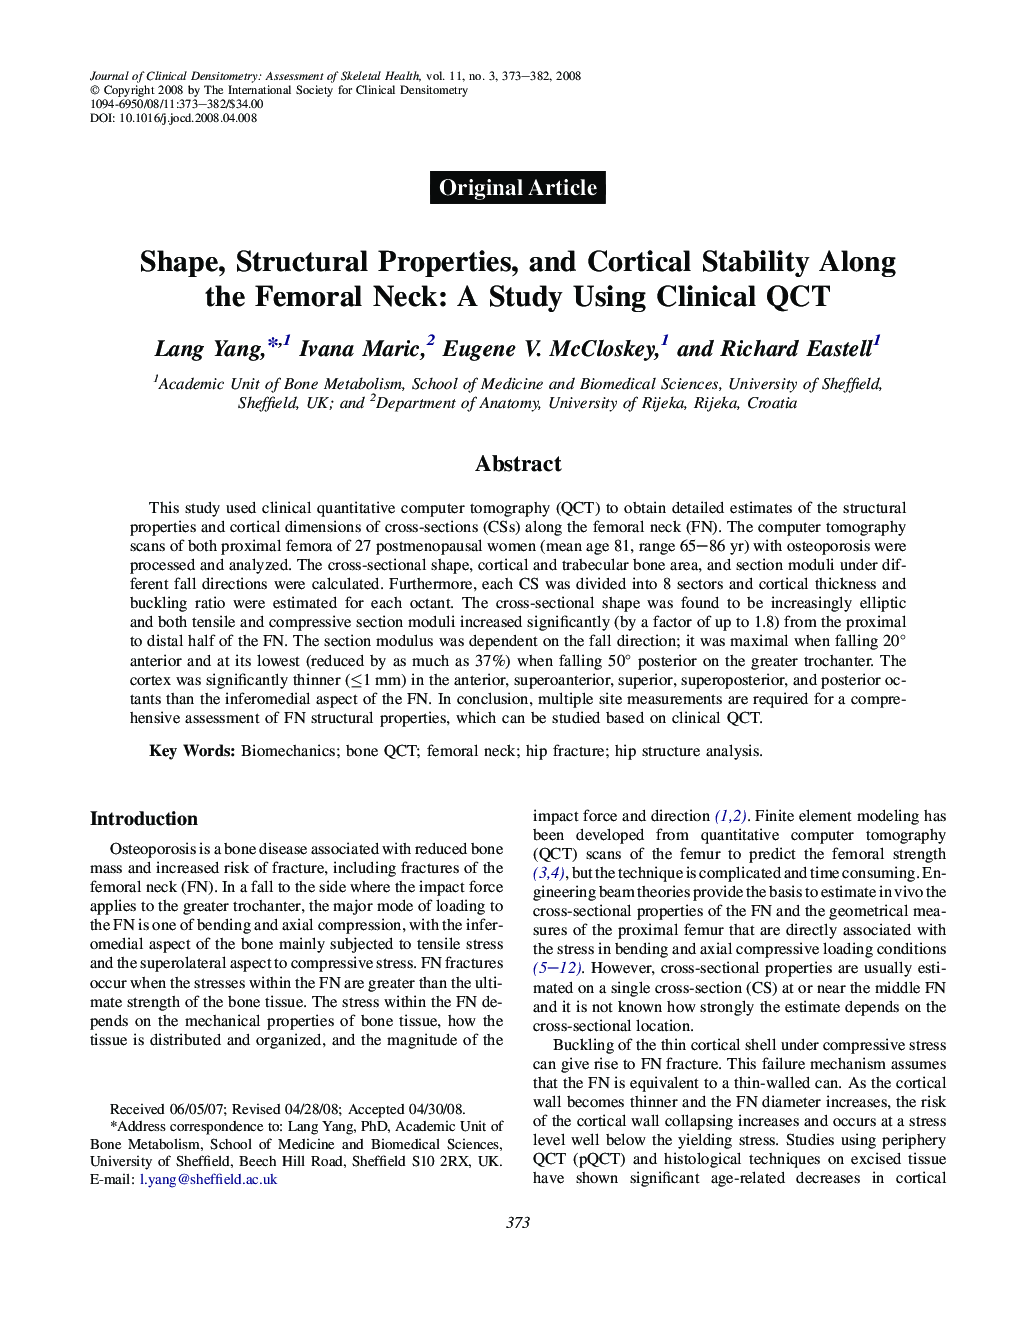 Shape, Structural Properties, and Cortical Stability Along the Femoral Neck: A Study Using Clinical QCT